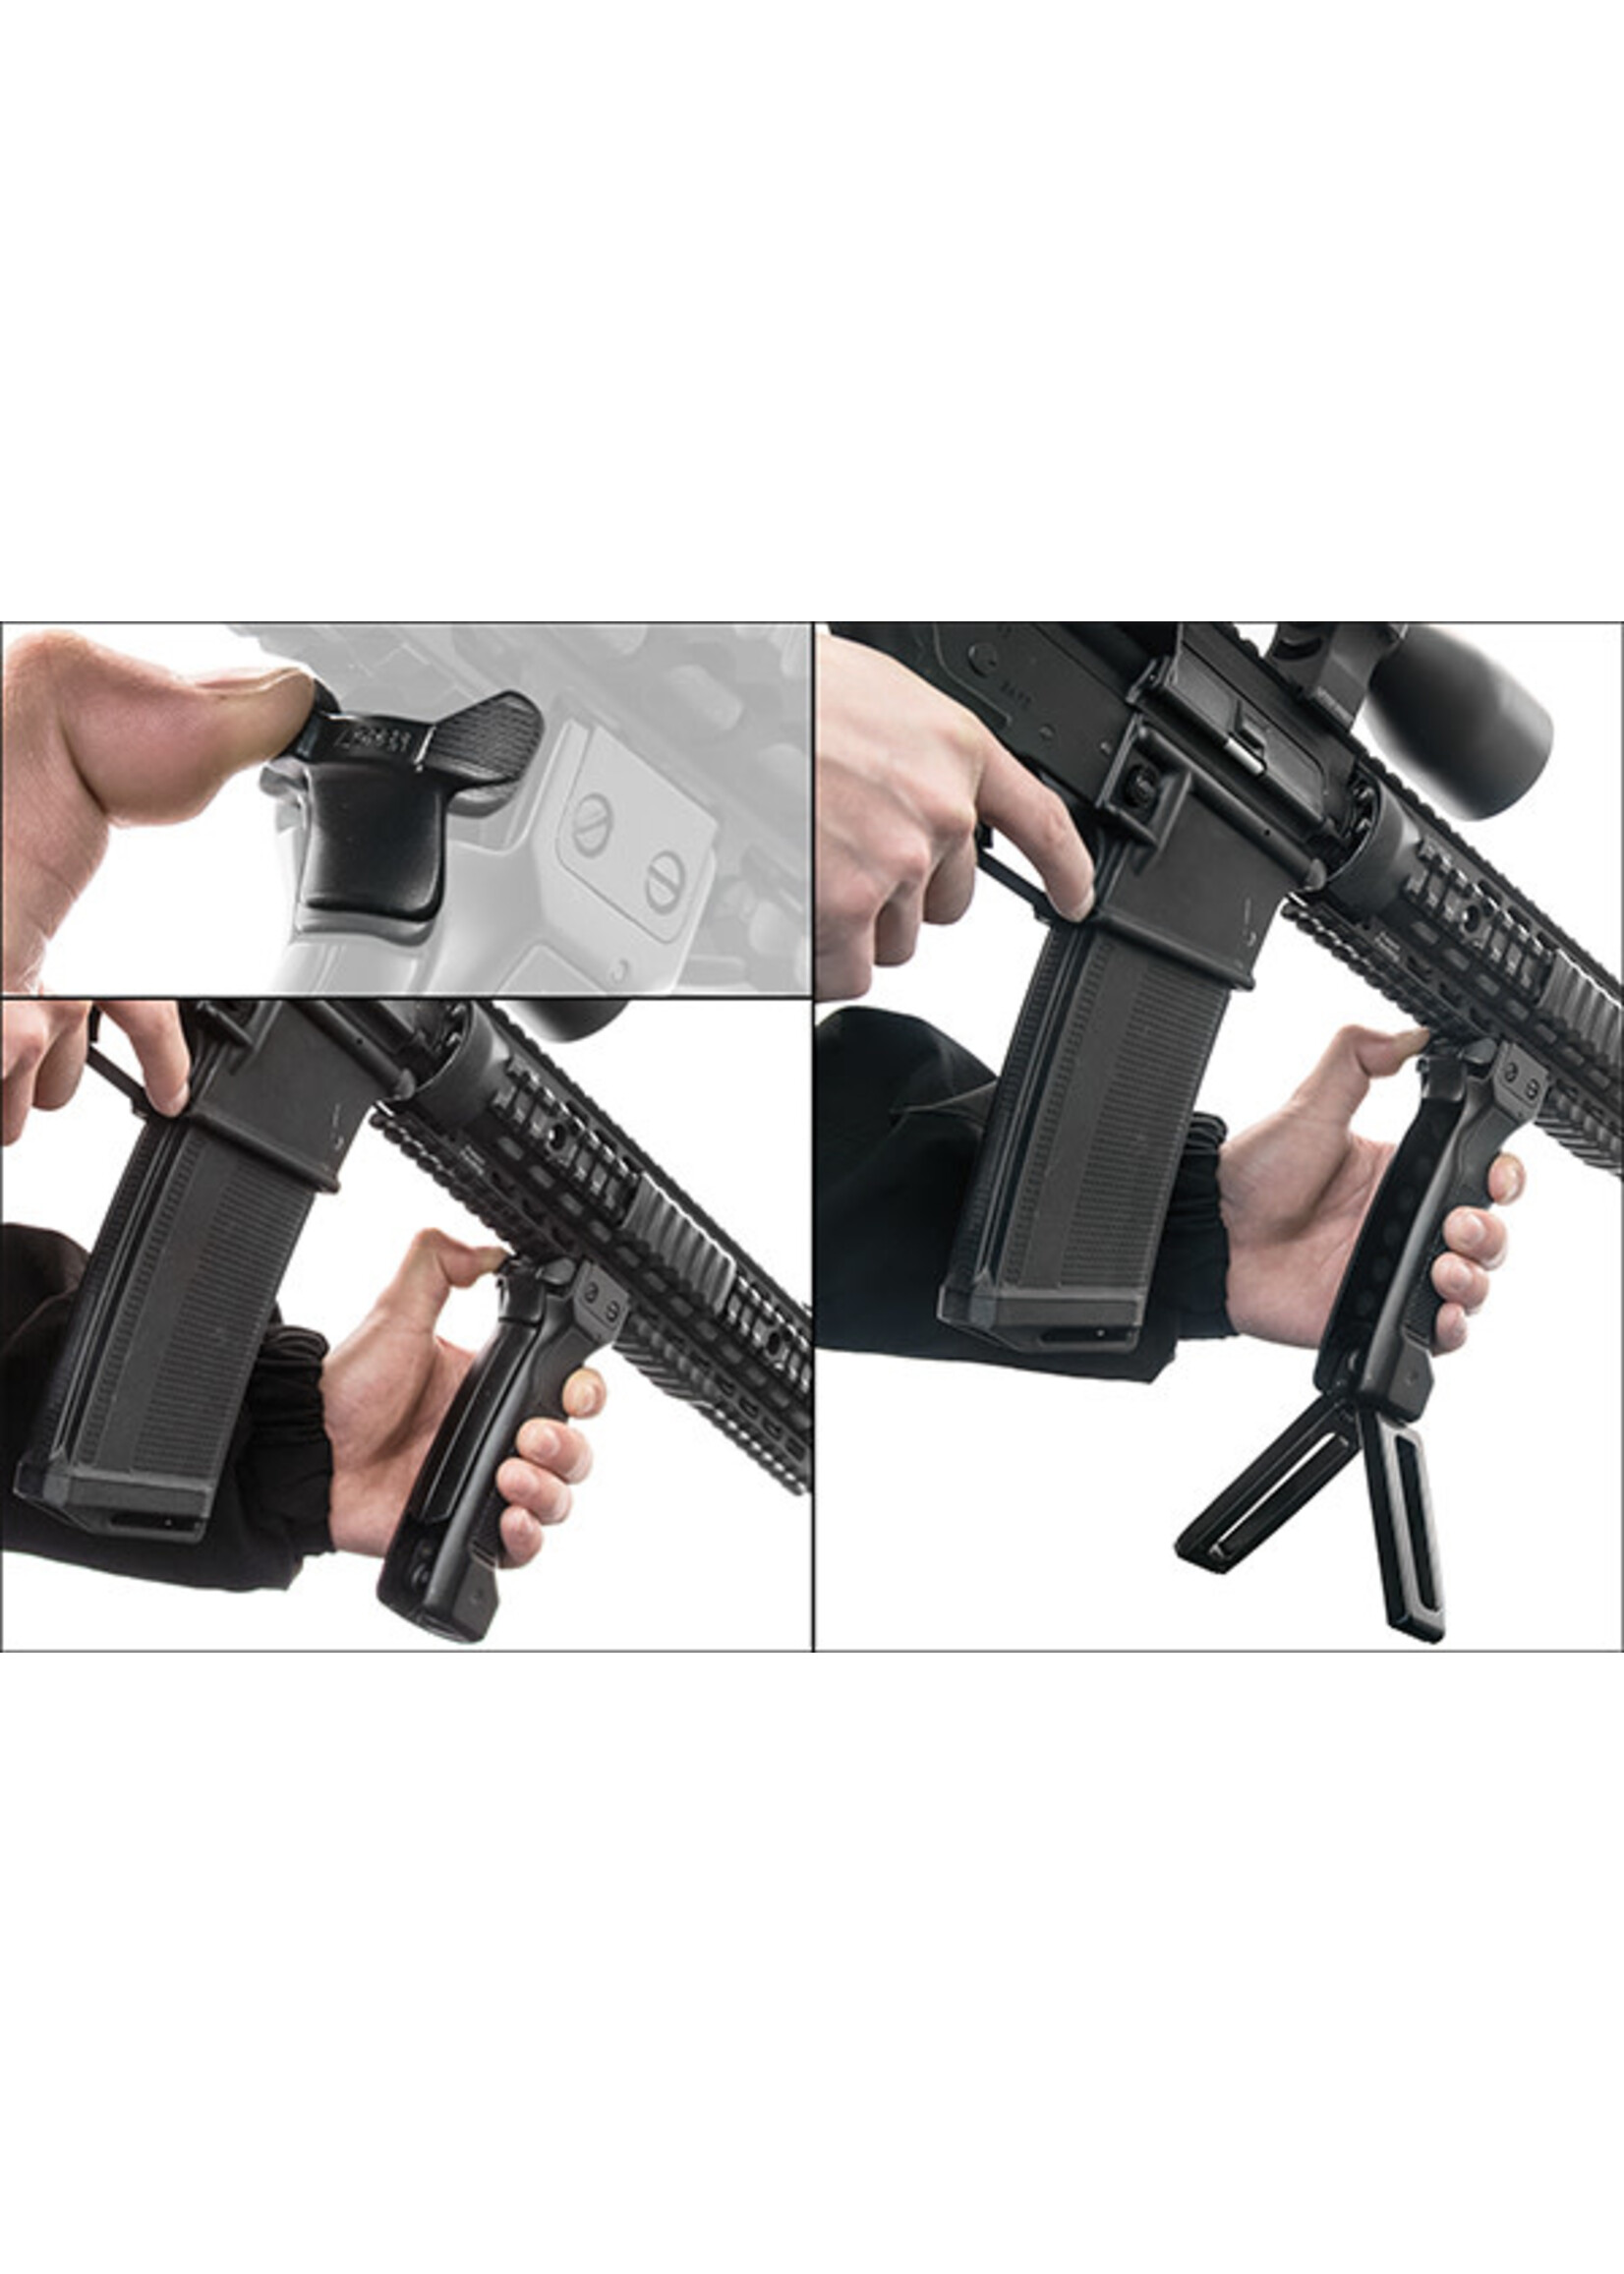 UTG COMBAT D GRIP QUICK DEPLOYABLE BIPOD FOREGRIP